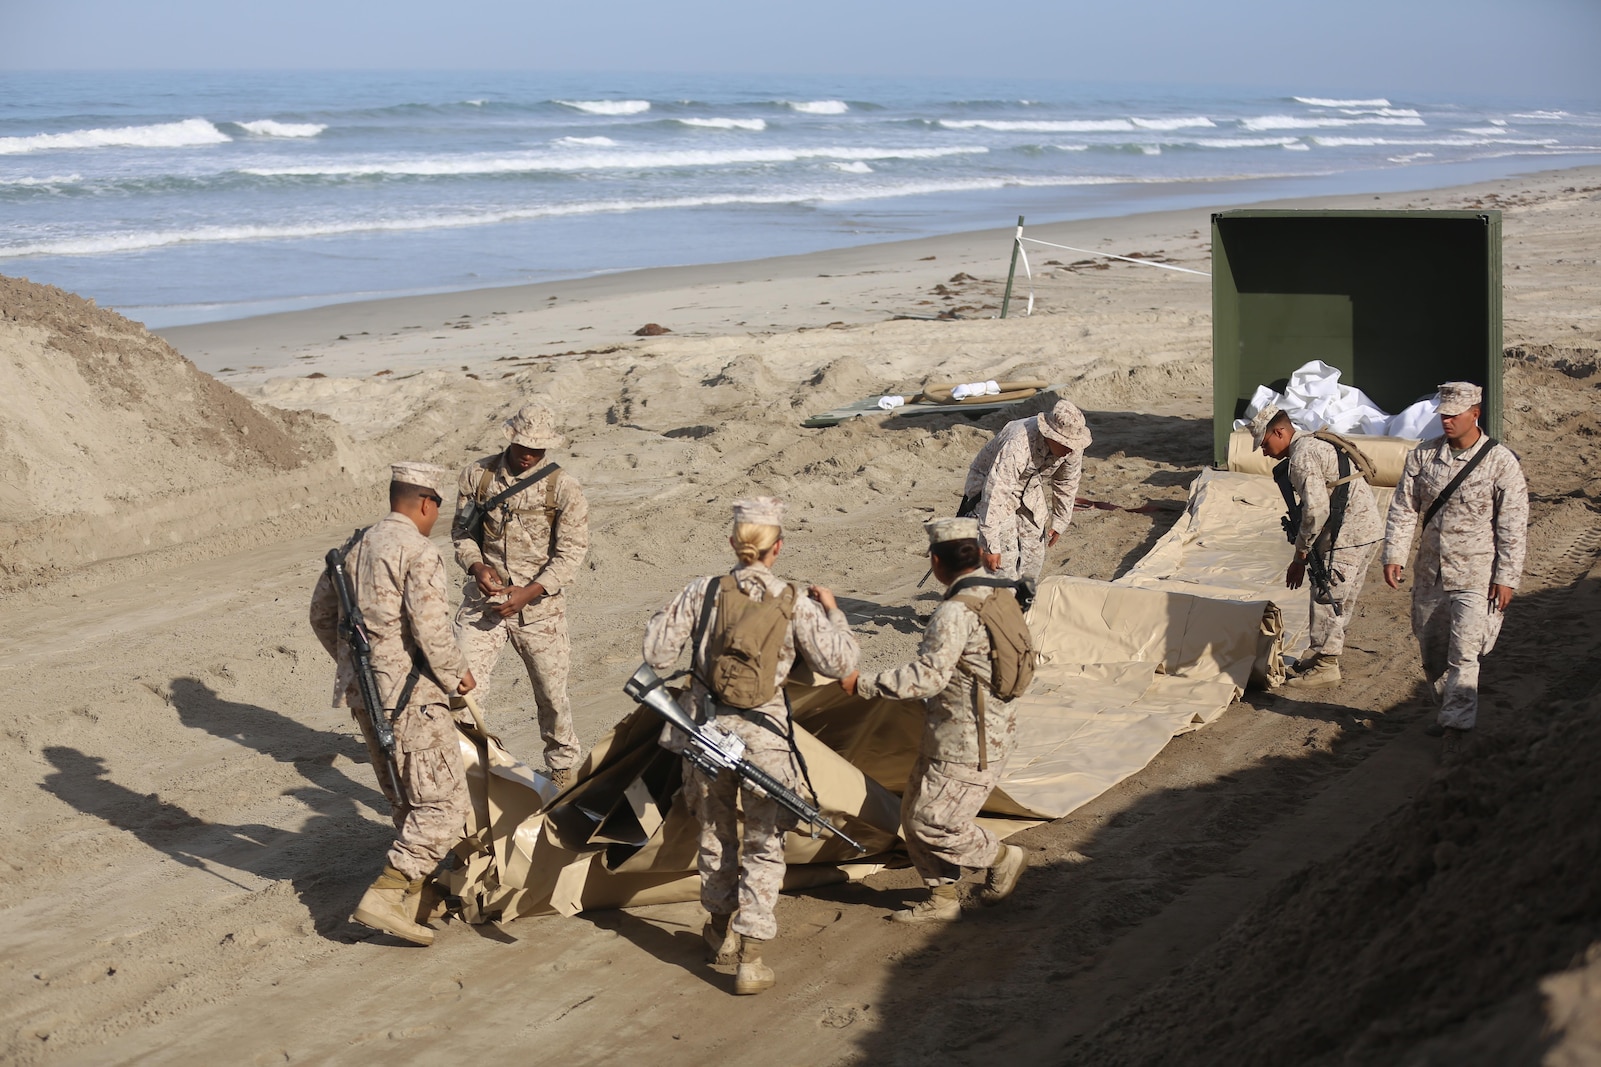 U.S. Marines with Bulk Fuel Company, 7th Engineer Support Battalion, 1st Marine Logistics Group,  roll out a berm liner on Camp Pendleton Calif., May 1, 2015. The berm liner is used as part of the Beach Unloading System used to house fuel which is pumped from a ship off shore. (U.S. Marine Corps Photo by Cpl. Rodion Zabolotniy, Combat Camera/Released)